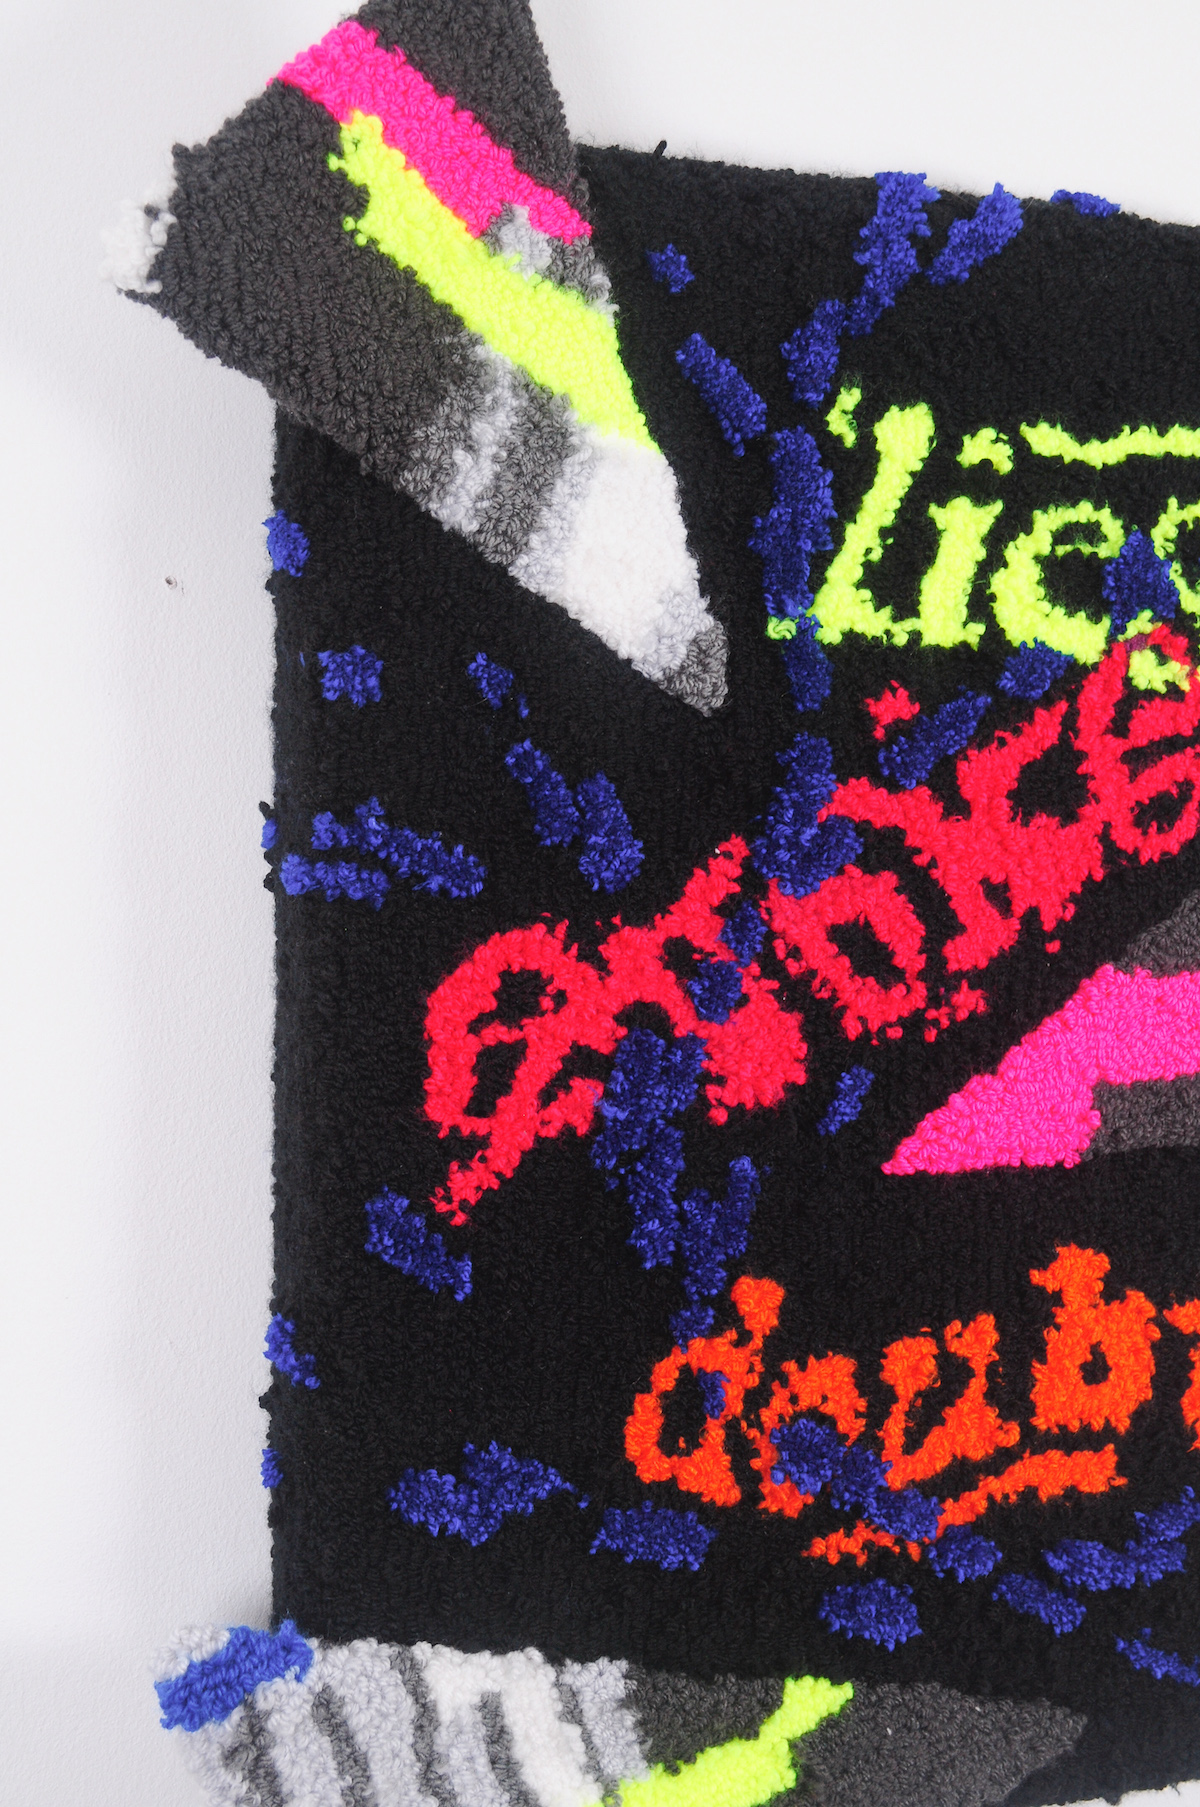 Multicolored fabric pieces glued together with text saying lies evoke doubt